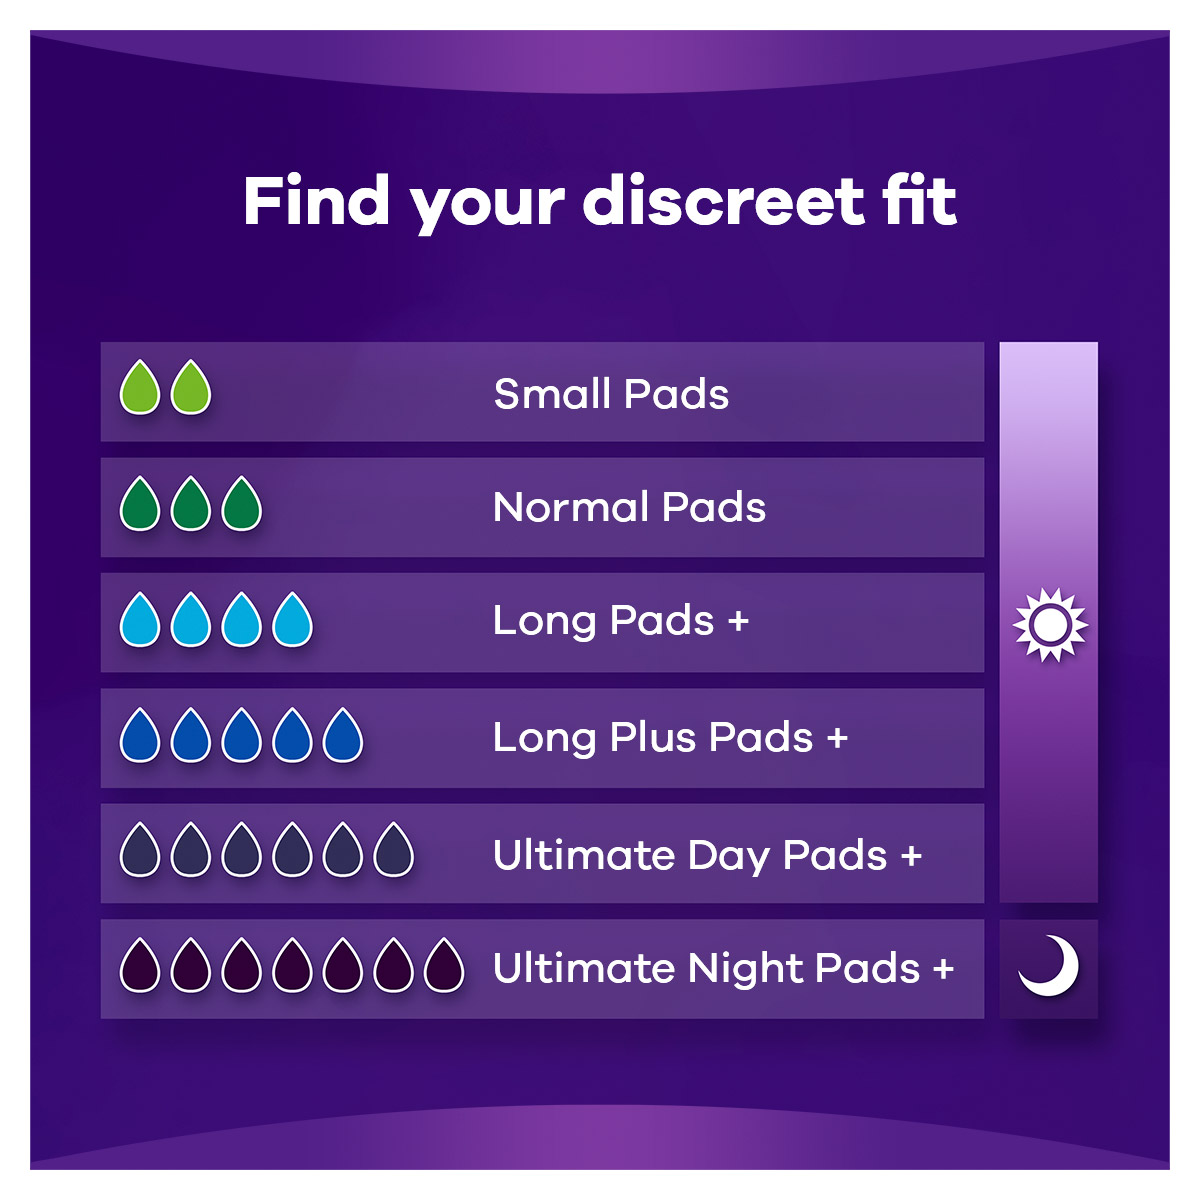 Always Discreet Incontinence Pads Ultimate Night